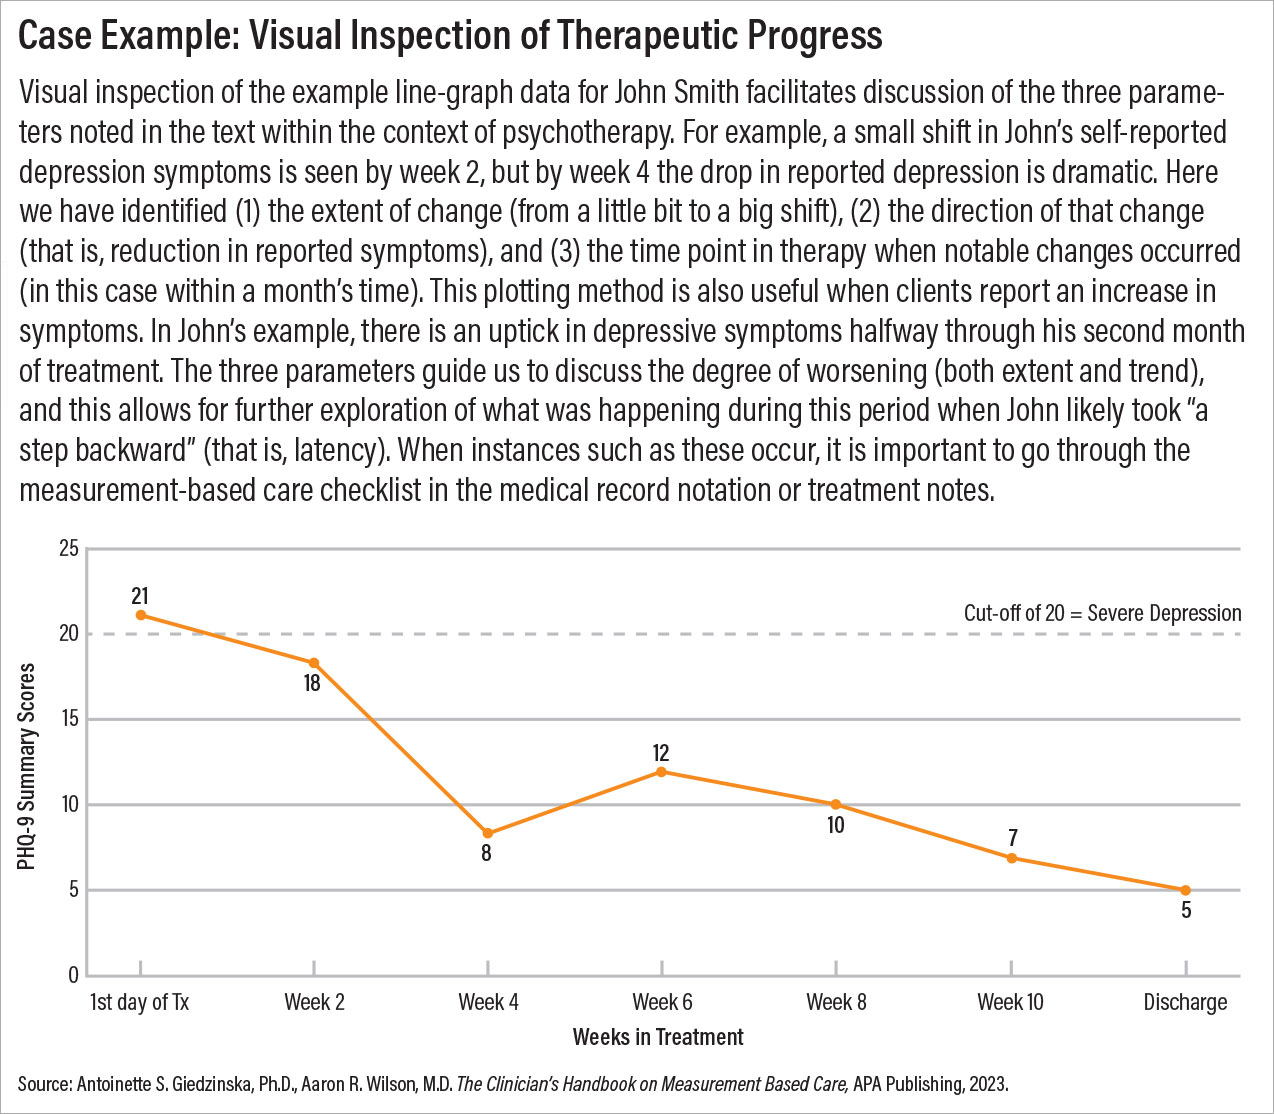 Figure: Case Example: Visual Inspection of Therapeutic Process